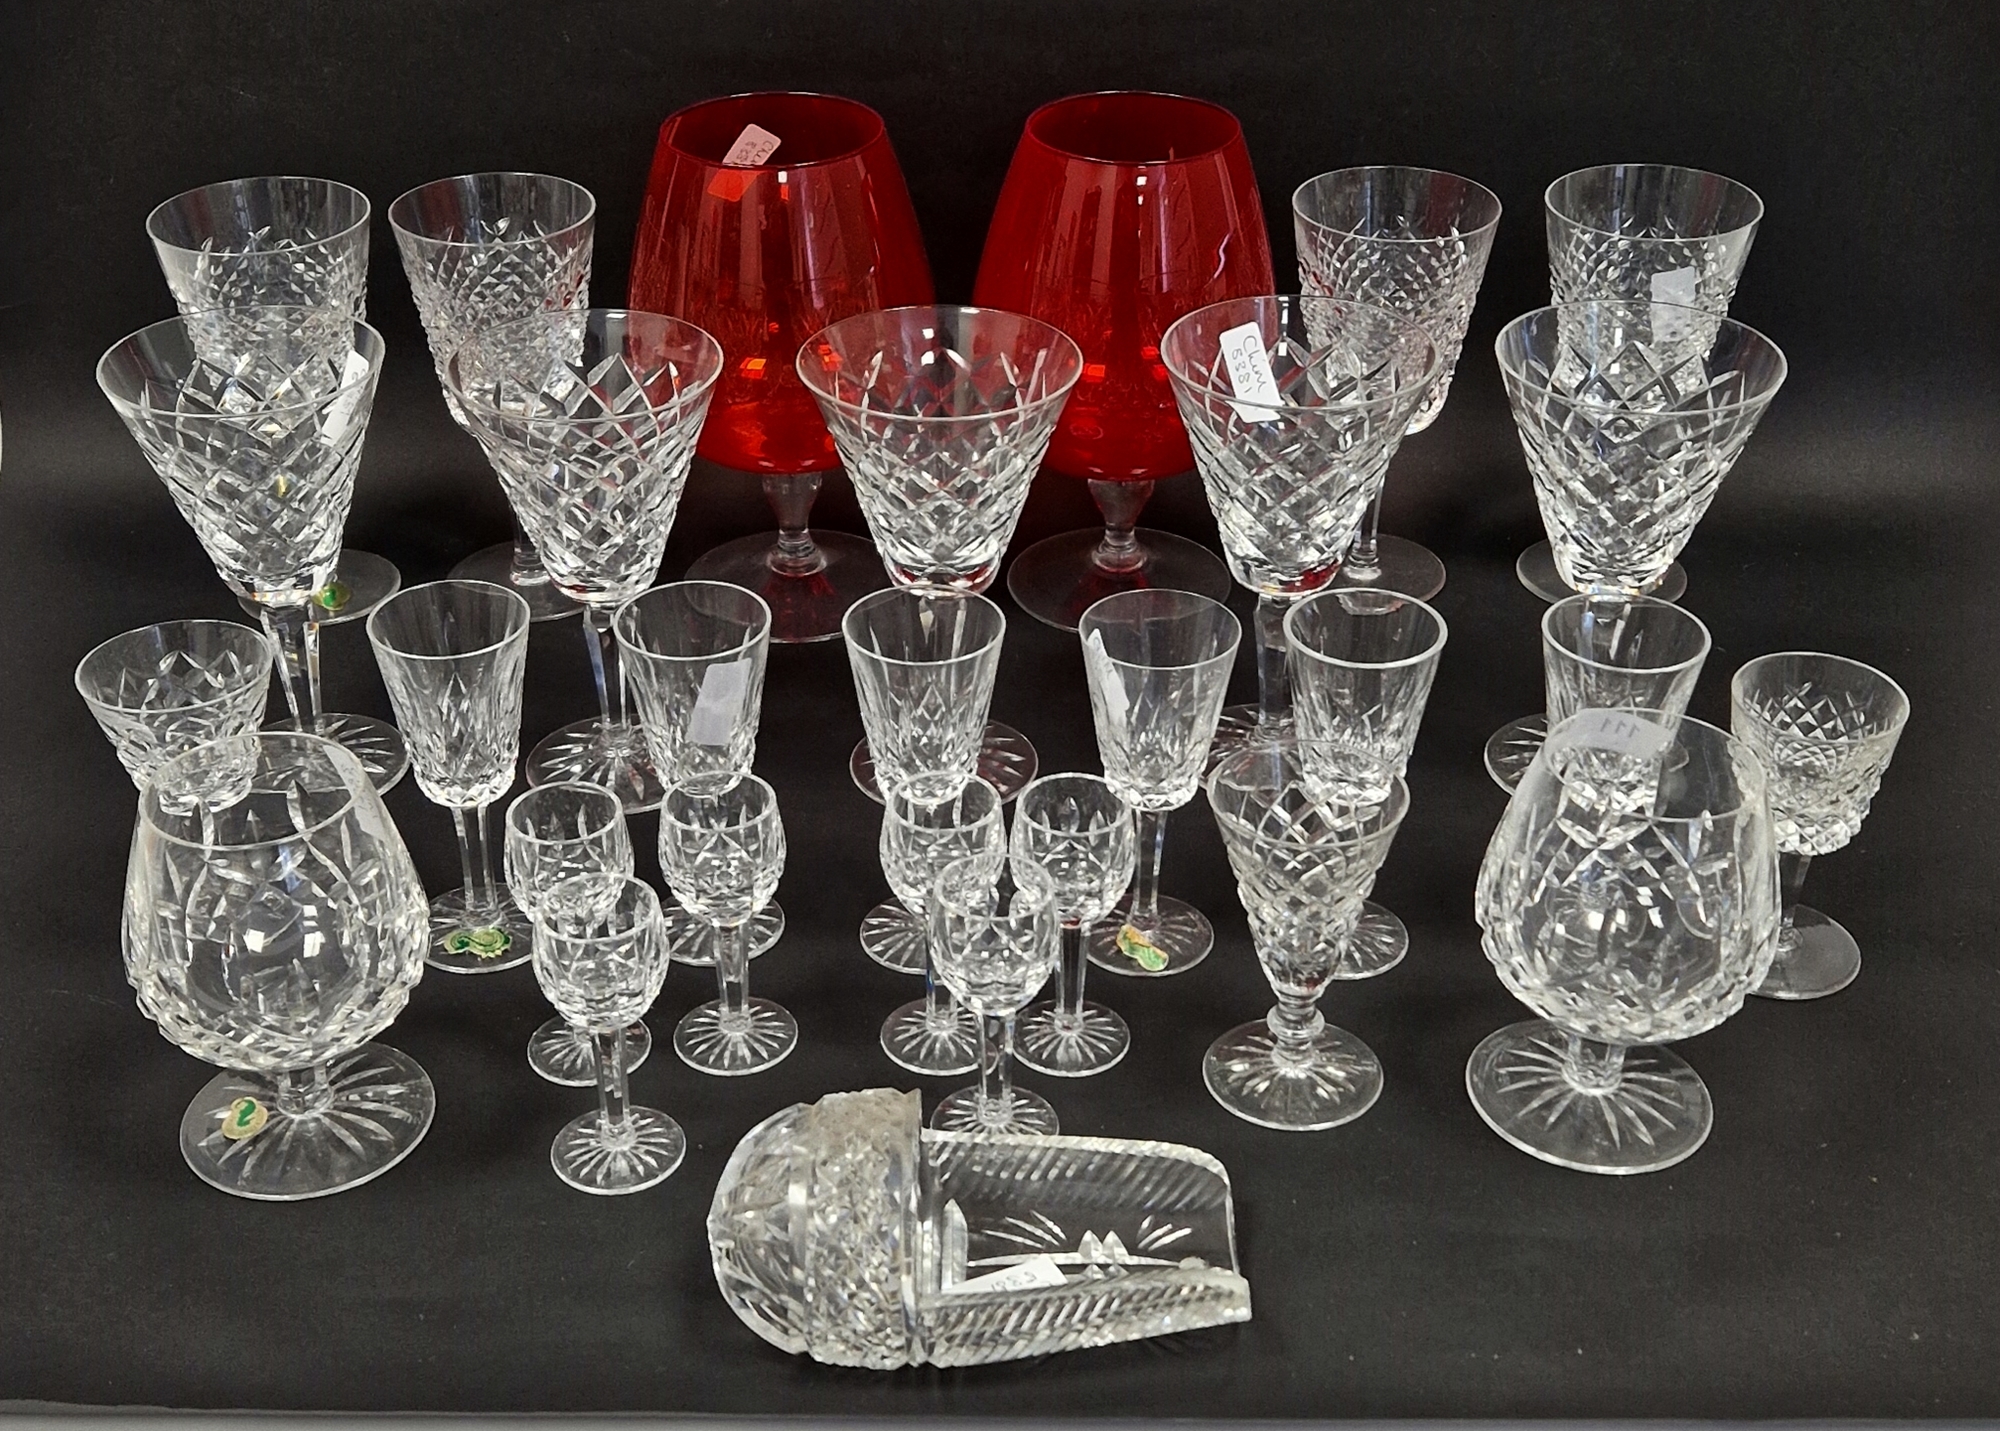 Waterford cut glass part table service with wine glasses in sizes, applied with labels and large